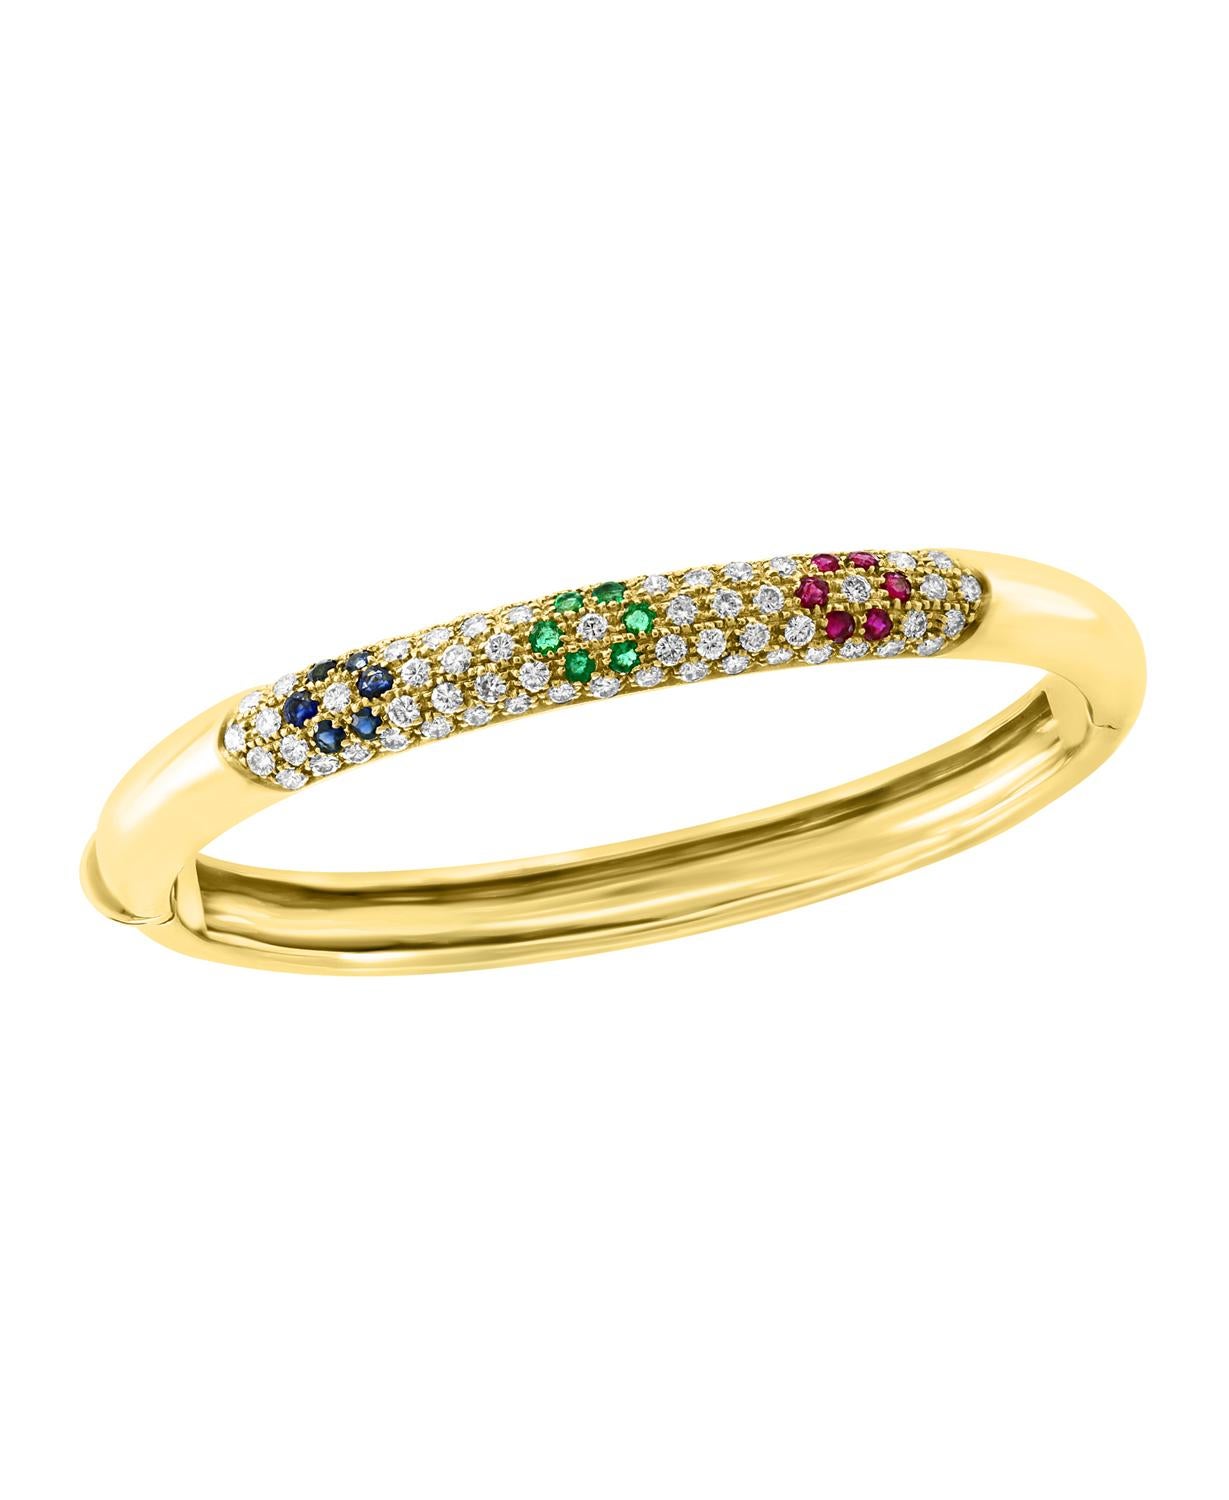  Emerald Ruby Sapphire & Diamond  Cuff  Bangle Bracelet In 18 Karat Yellow Gold 
A spectacular jewelry piece.  This exceptional  and very reasonable in price Bangle bracelet has Three Flowers  one  of each Ruby  Emerald and Sapphire weighing